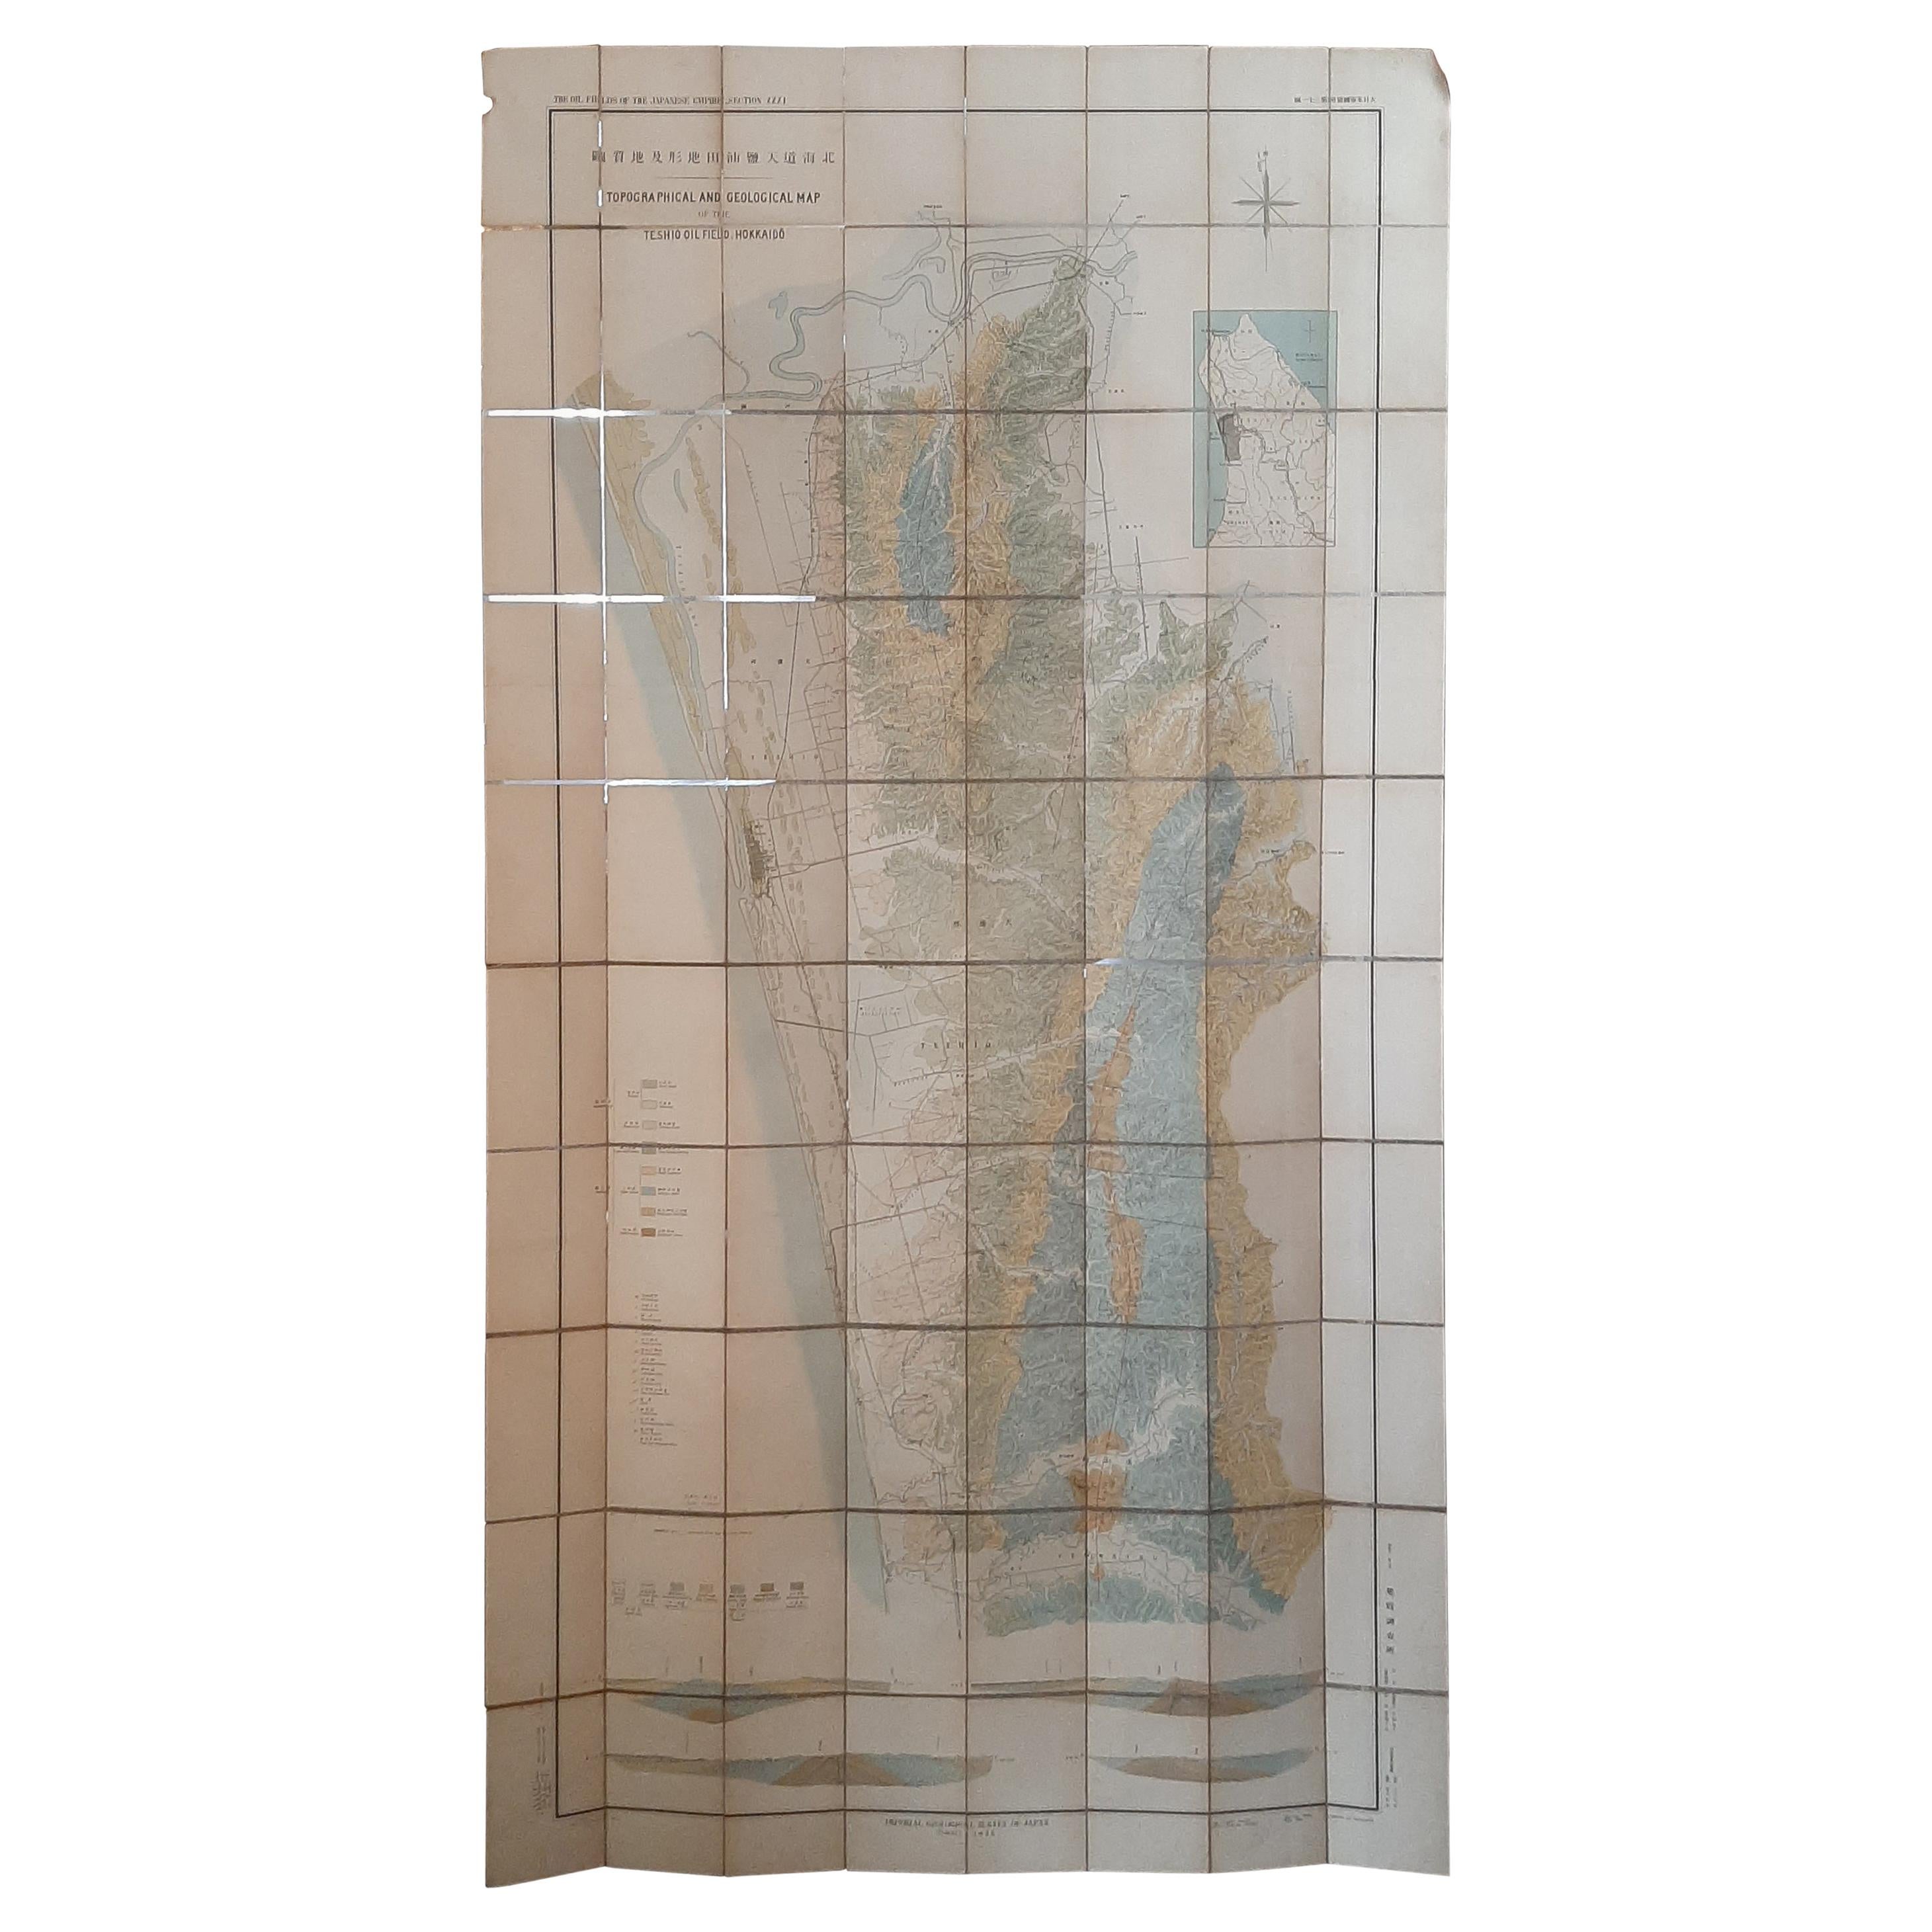 Large Topographical and Geological Map of the Teshio Oil Field, '1936' For Sale